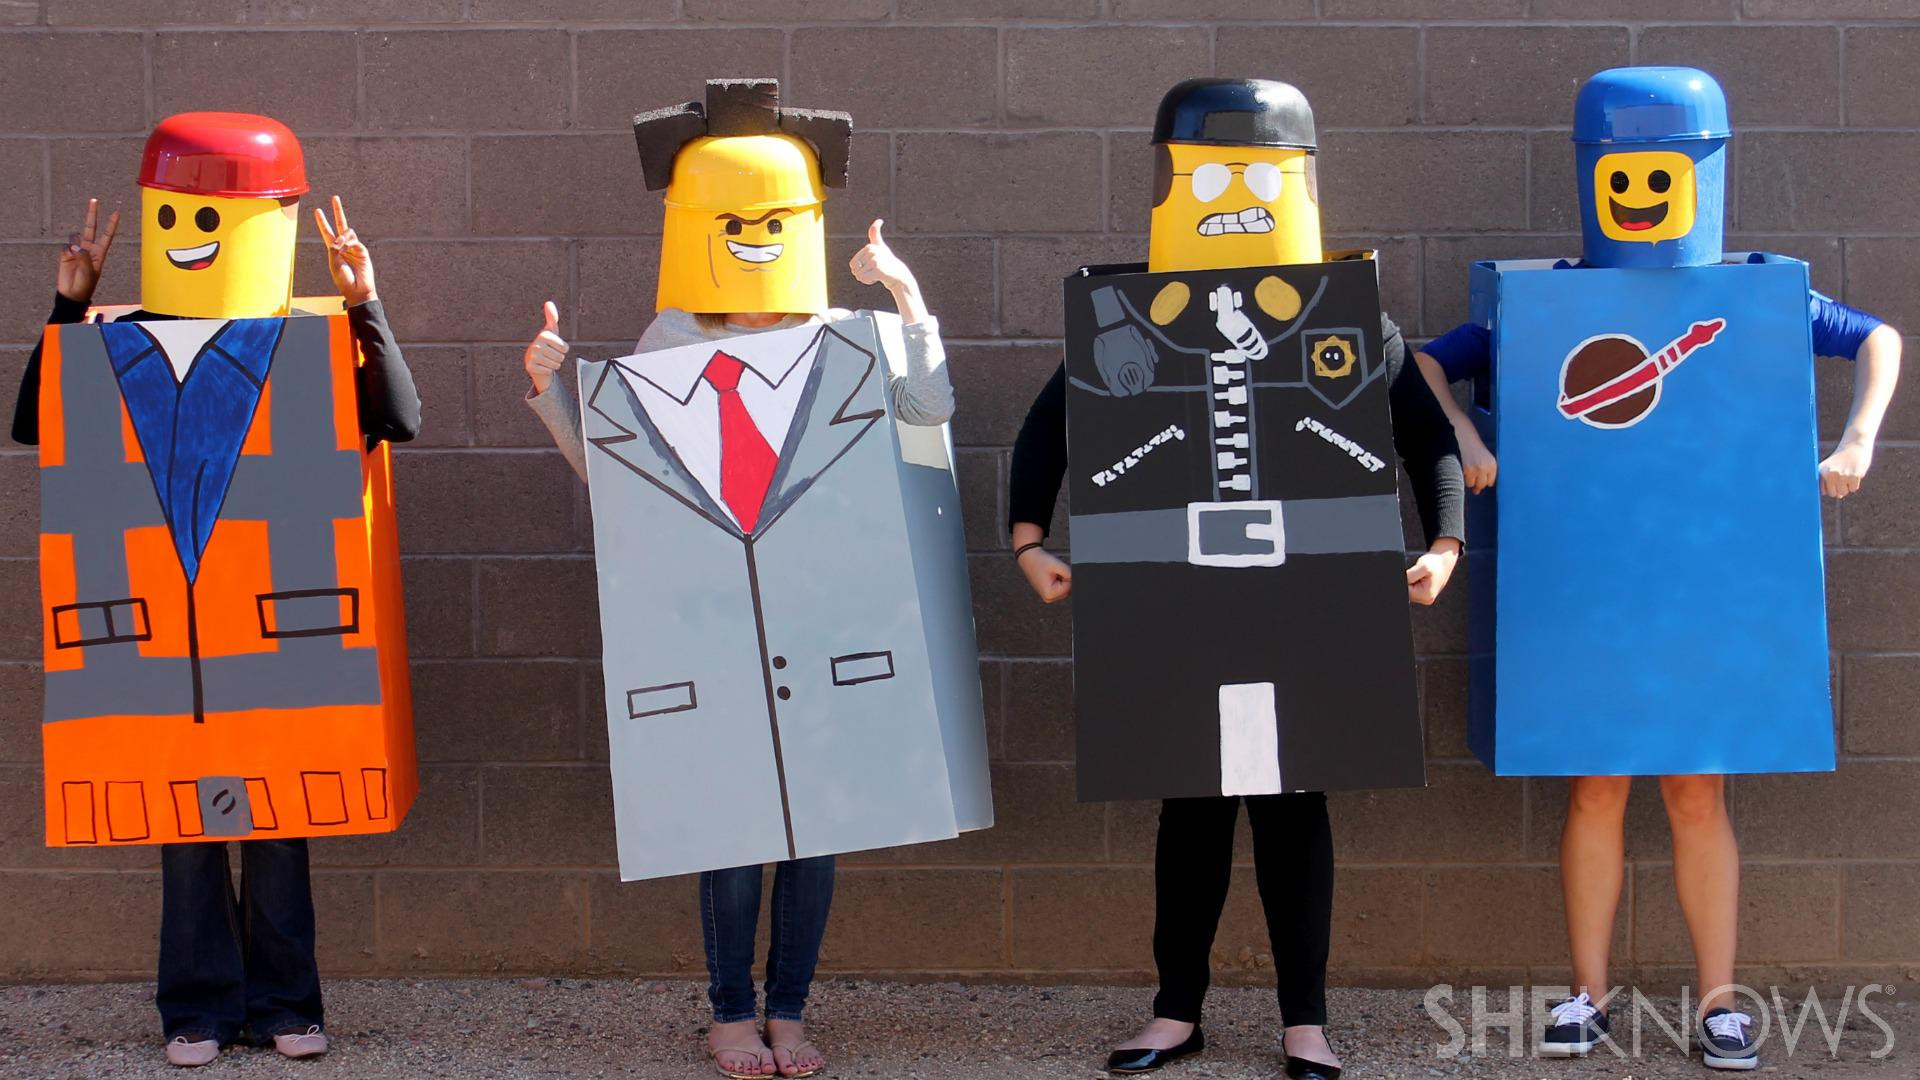 Lego Costume DIY
 Everything is awesome about these DIY costumes from The